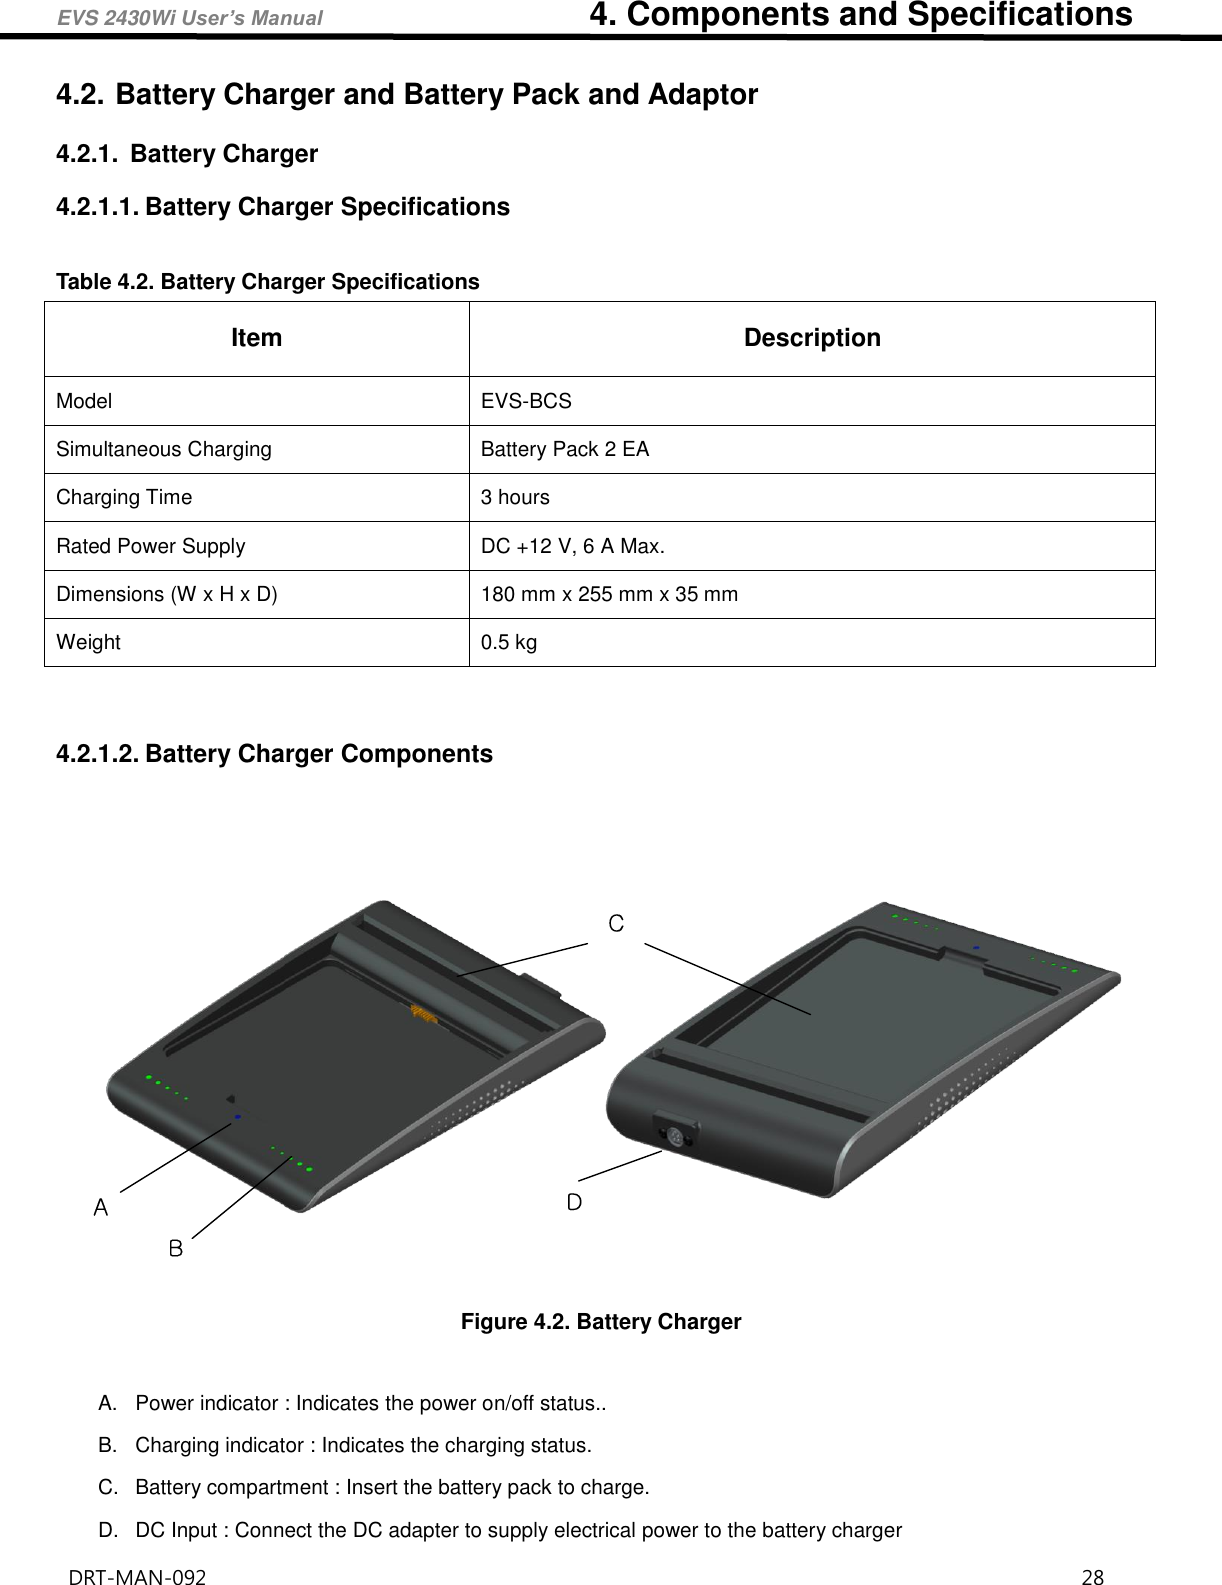 EVS 2430Wi User’s Manual                                4. Components and Specifications DRT-MAN-092                                                                                    28   4.2. Battery Charger and Battery Pack and Adaptor 4.2.1.  Battery Charger 4.2.1.1. Battery Charger Specifications  Table 4.2. Battery Charger Specifications Item Description Model EVS-BCS Simultaneous Charging   Battery Pack 2 EA   Charging Time   3 hours   Rated Power Supply DC +12 V, 6 A Max.   Dimensions (W x H x D) 180 mm x 255 mm x 35 mm Weight 0.5 kg    4.2.1.2. Battery Charger Components     ABDC Figure 4.2. Battery Charger  A.  Power indicator : Indicates the power on/off status.. B.  Charging indicator : Indicates the charging status.   C.  Battery compartment : Insert the battery pack to charge.   D.  DC Input : Connect the DC adapter to supply electrical power to the battery charger   